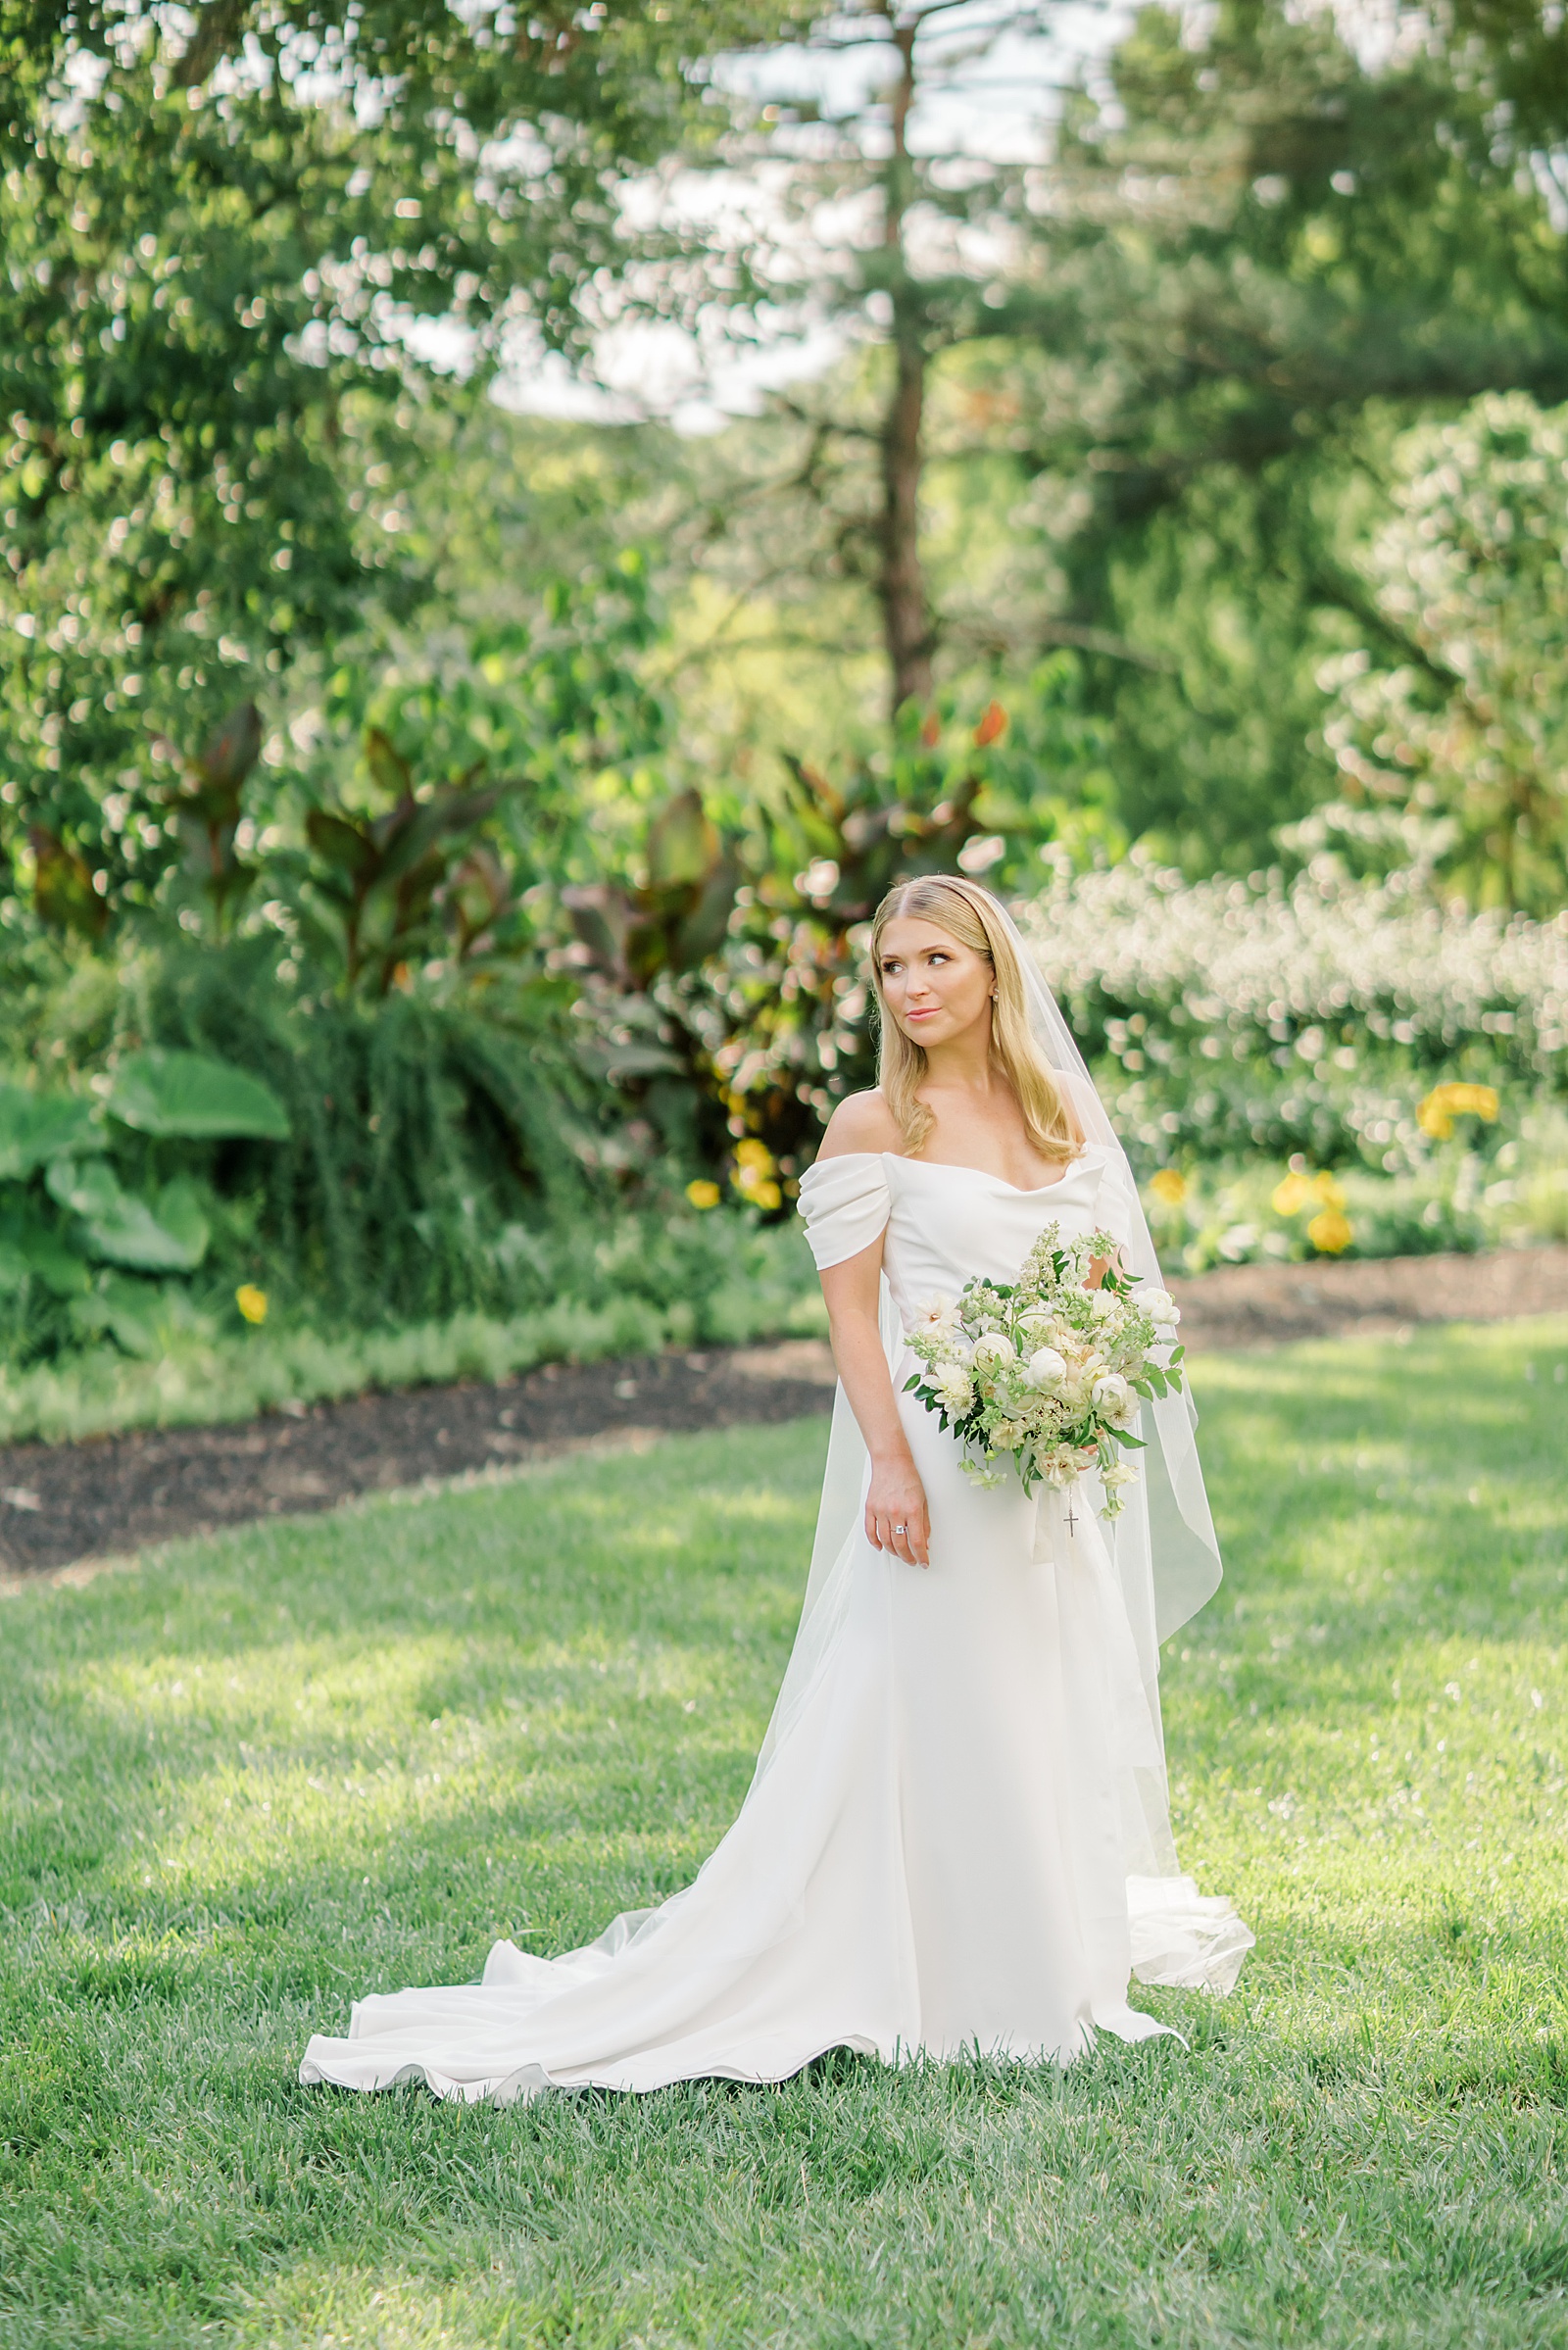 Bride in off shoulder sarah seven wedding gown with cathedral veil